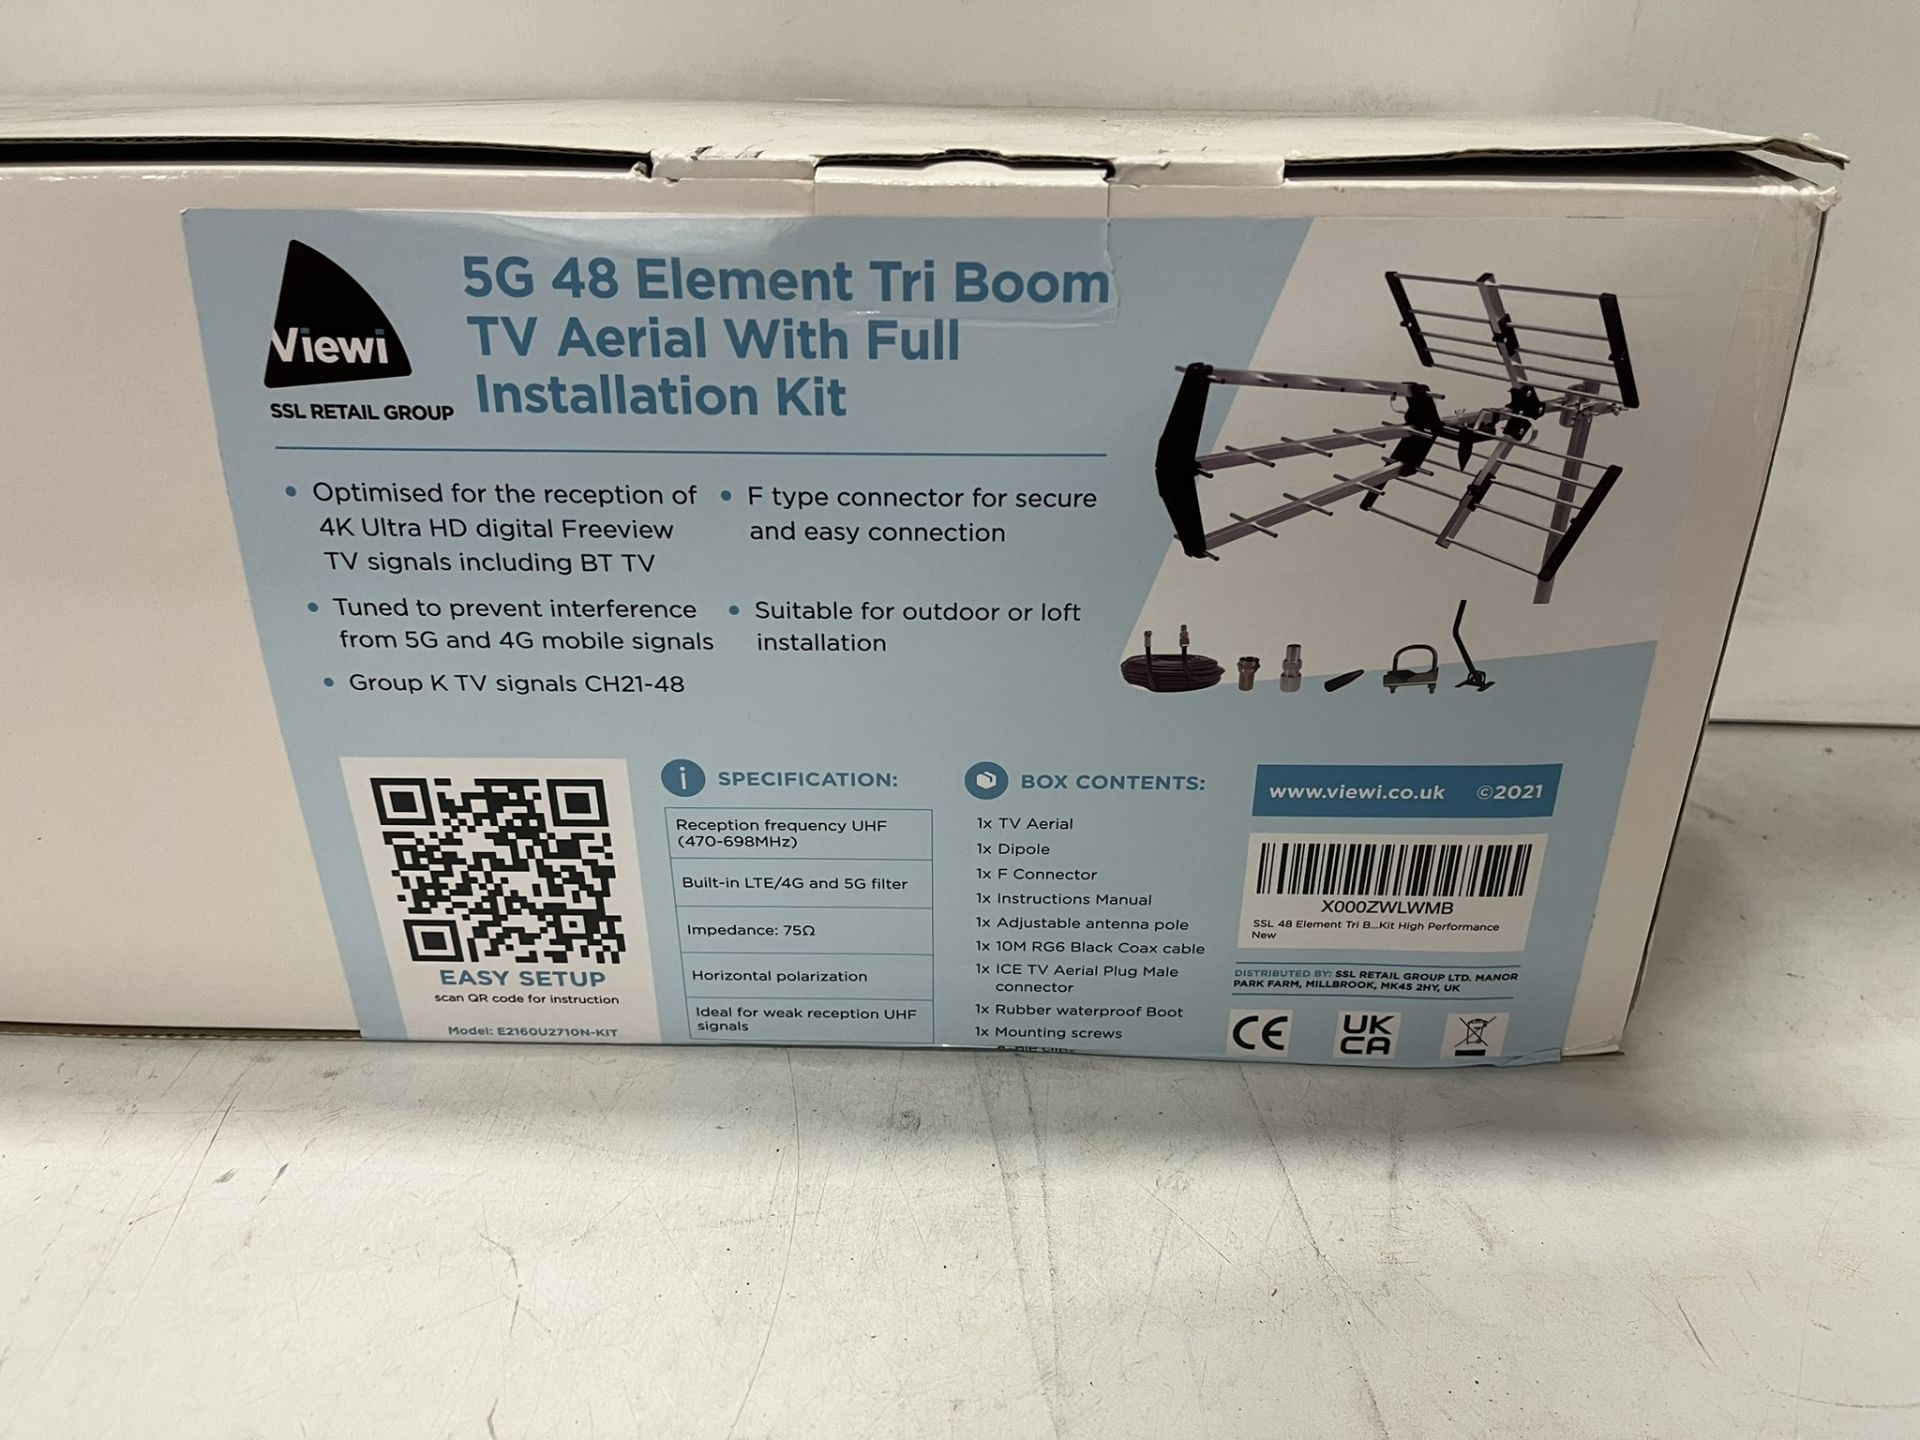 Viewi 5G 48 Element Tv Aerial Insallation Kit - Image 2 of 2